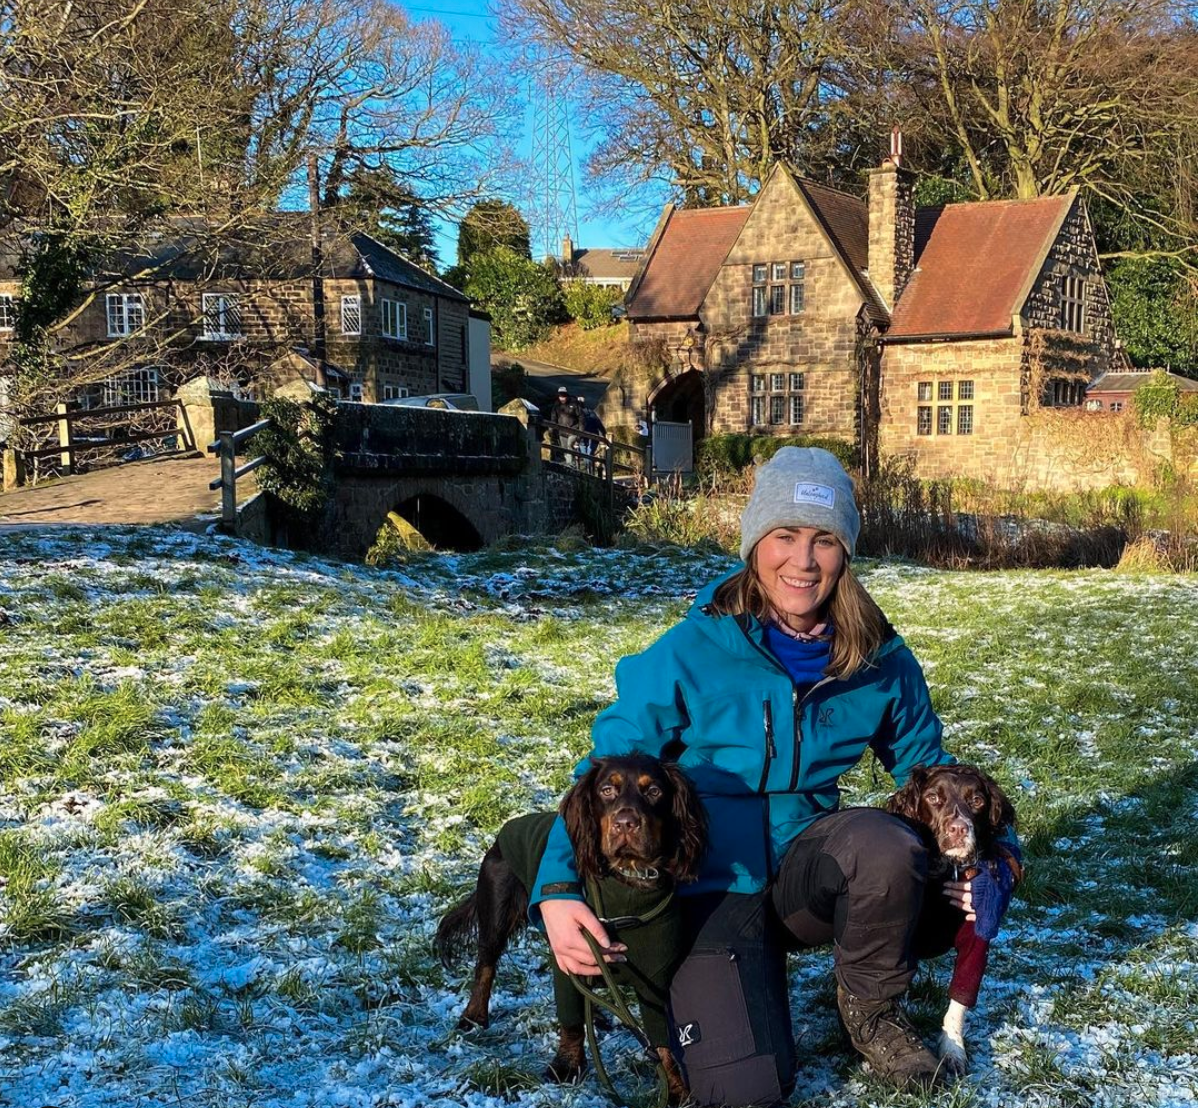 Above and top: Alicia with Millie and Ted. The dogs now have over 17K followers on their Instagram account (https://www.instagram.com/millie_and_ted/?hl=en) which features their adventures.